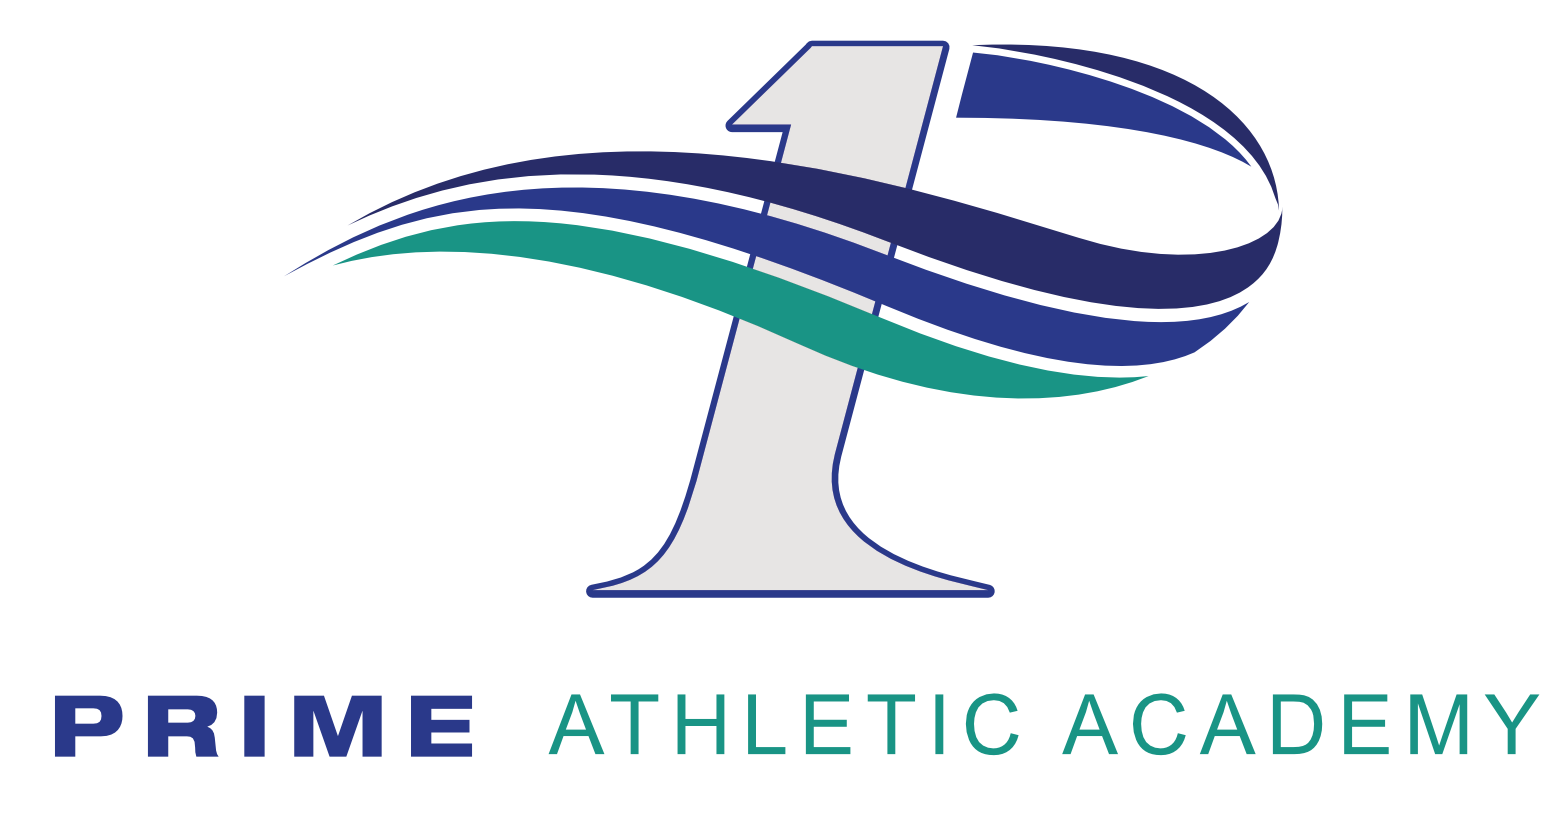 Welcome to the Prime Athletic Academy